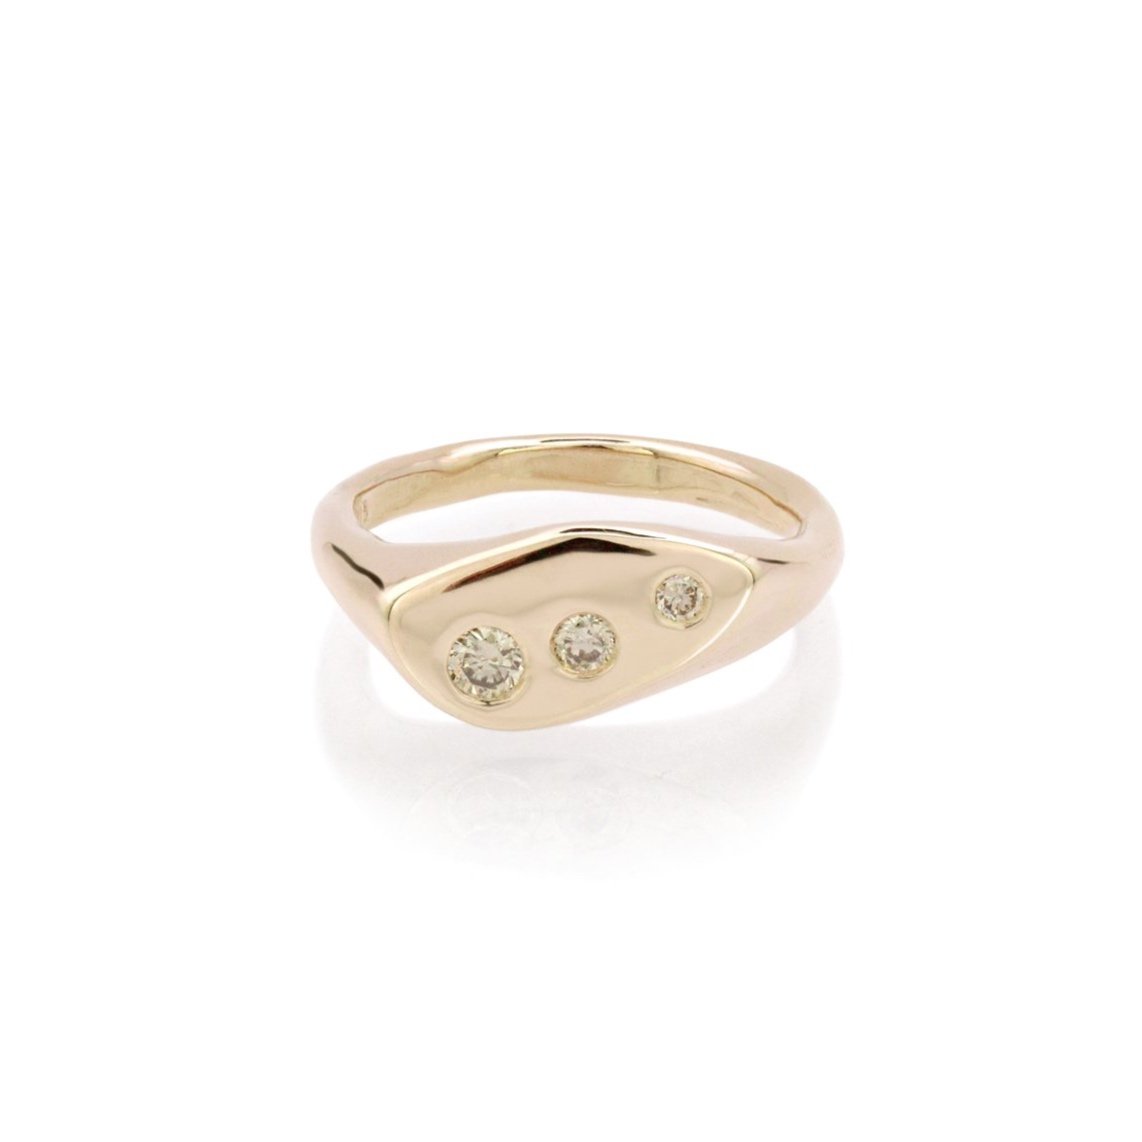 The Orions Belt Ring by Catori Life